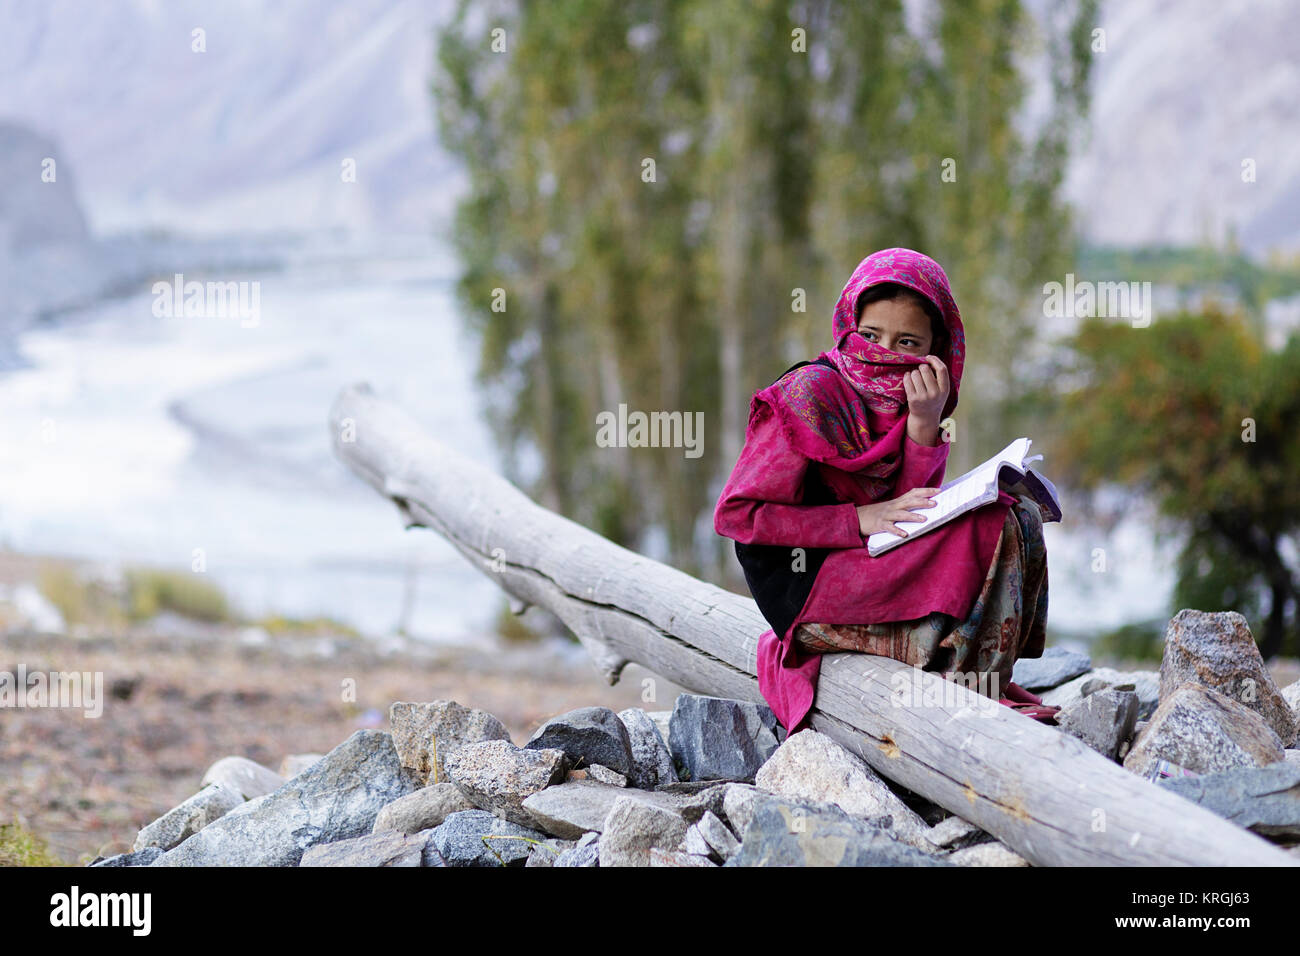 A young balti girl sitting on a branch and covering her face with a colorful scarf, Turtuk, Nubra valley, Ladakh, Jammu and Kashmir, India. Stock Photo